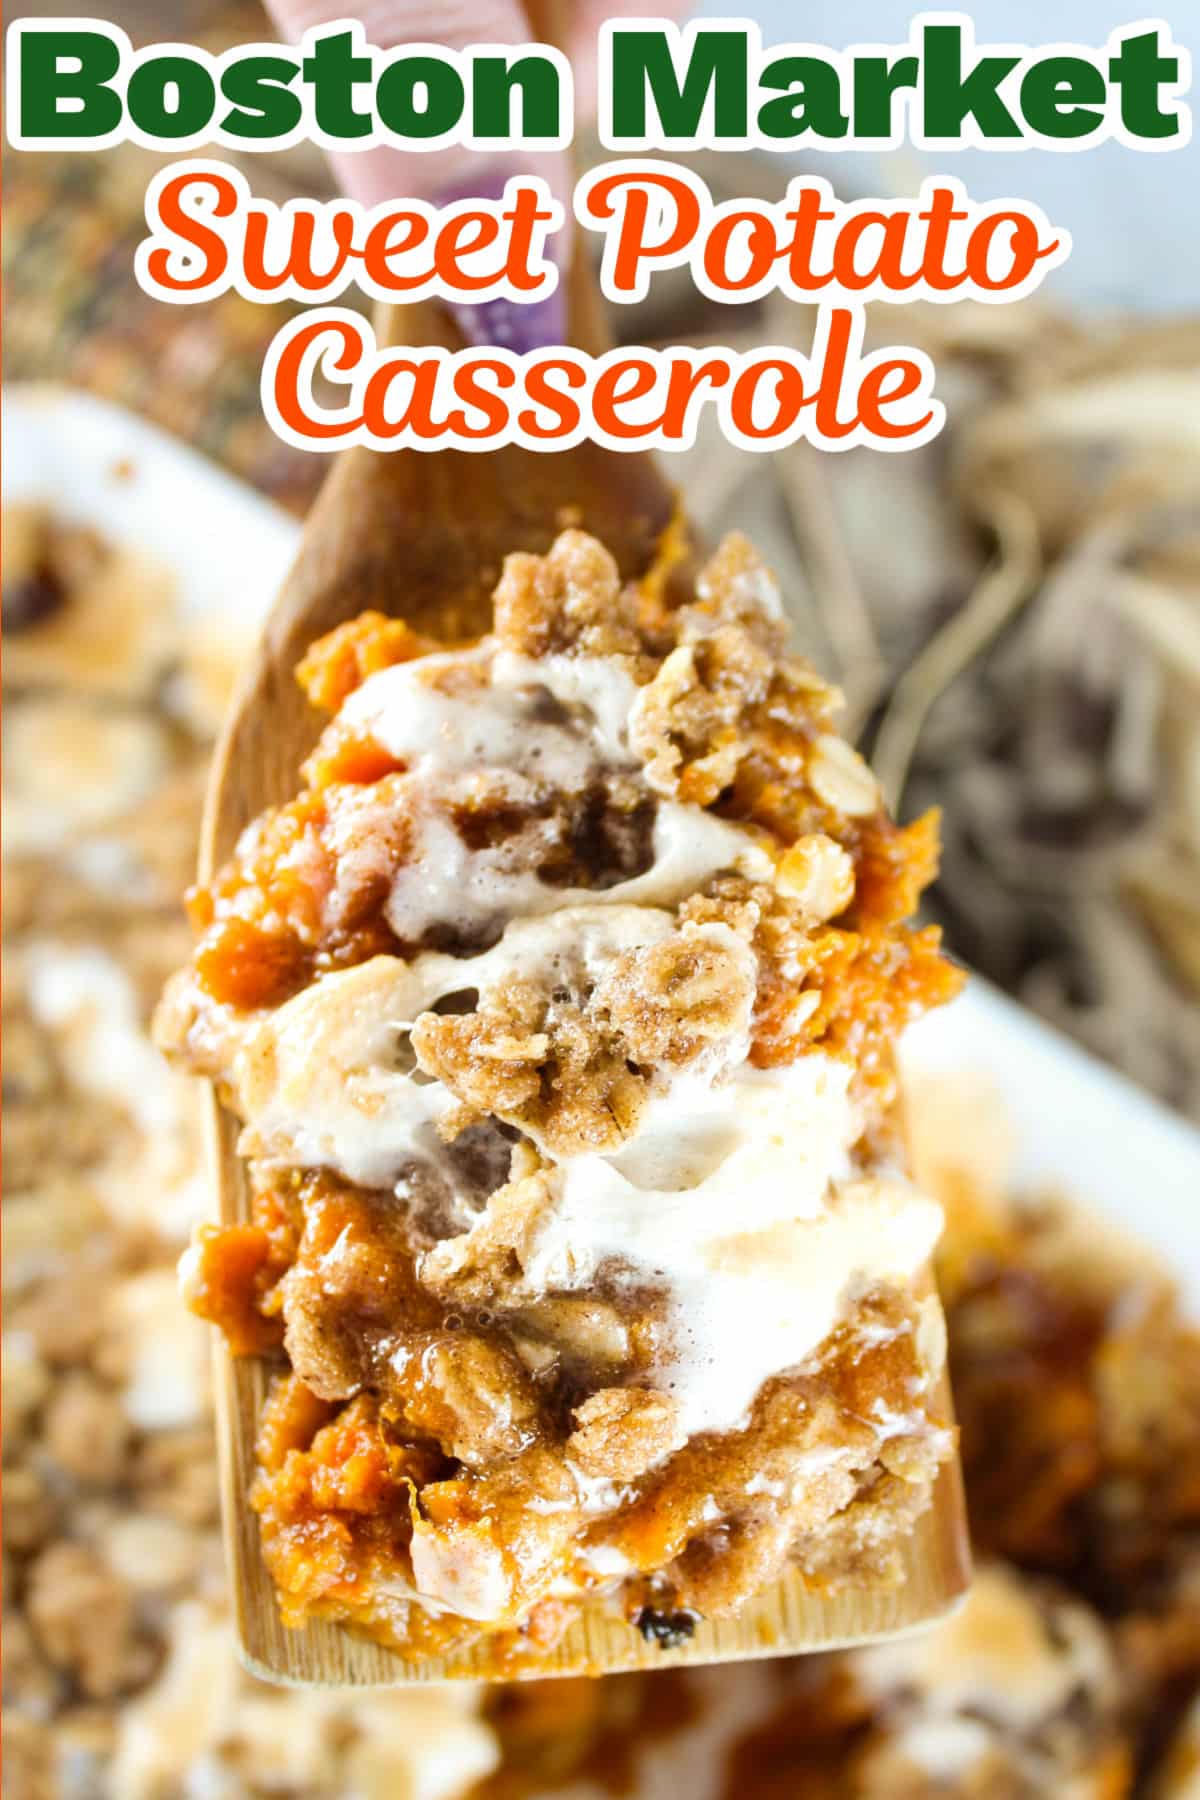 This Copycat Boston Market Sweet Potato Casserole is a delicious combination of sweet potatoes, molasses, vanilla, marshmallows, and topped with a brown sugar streusel. It will quickly become a family favorite! via @foodhussy